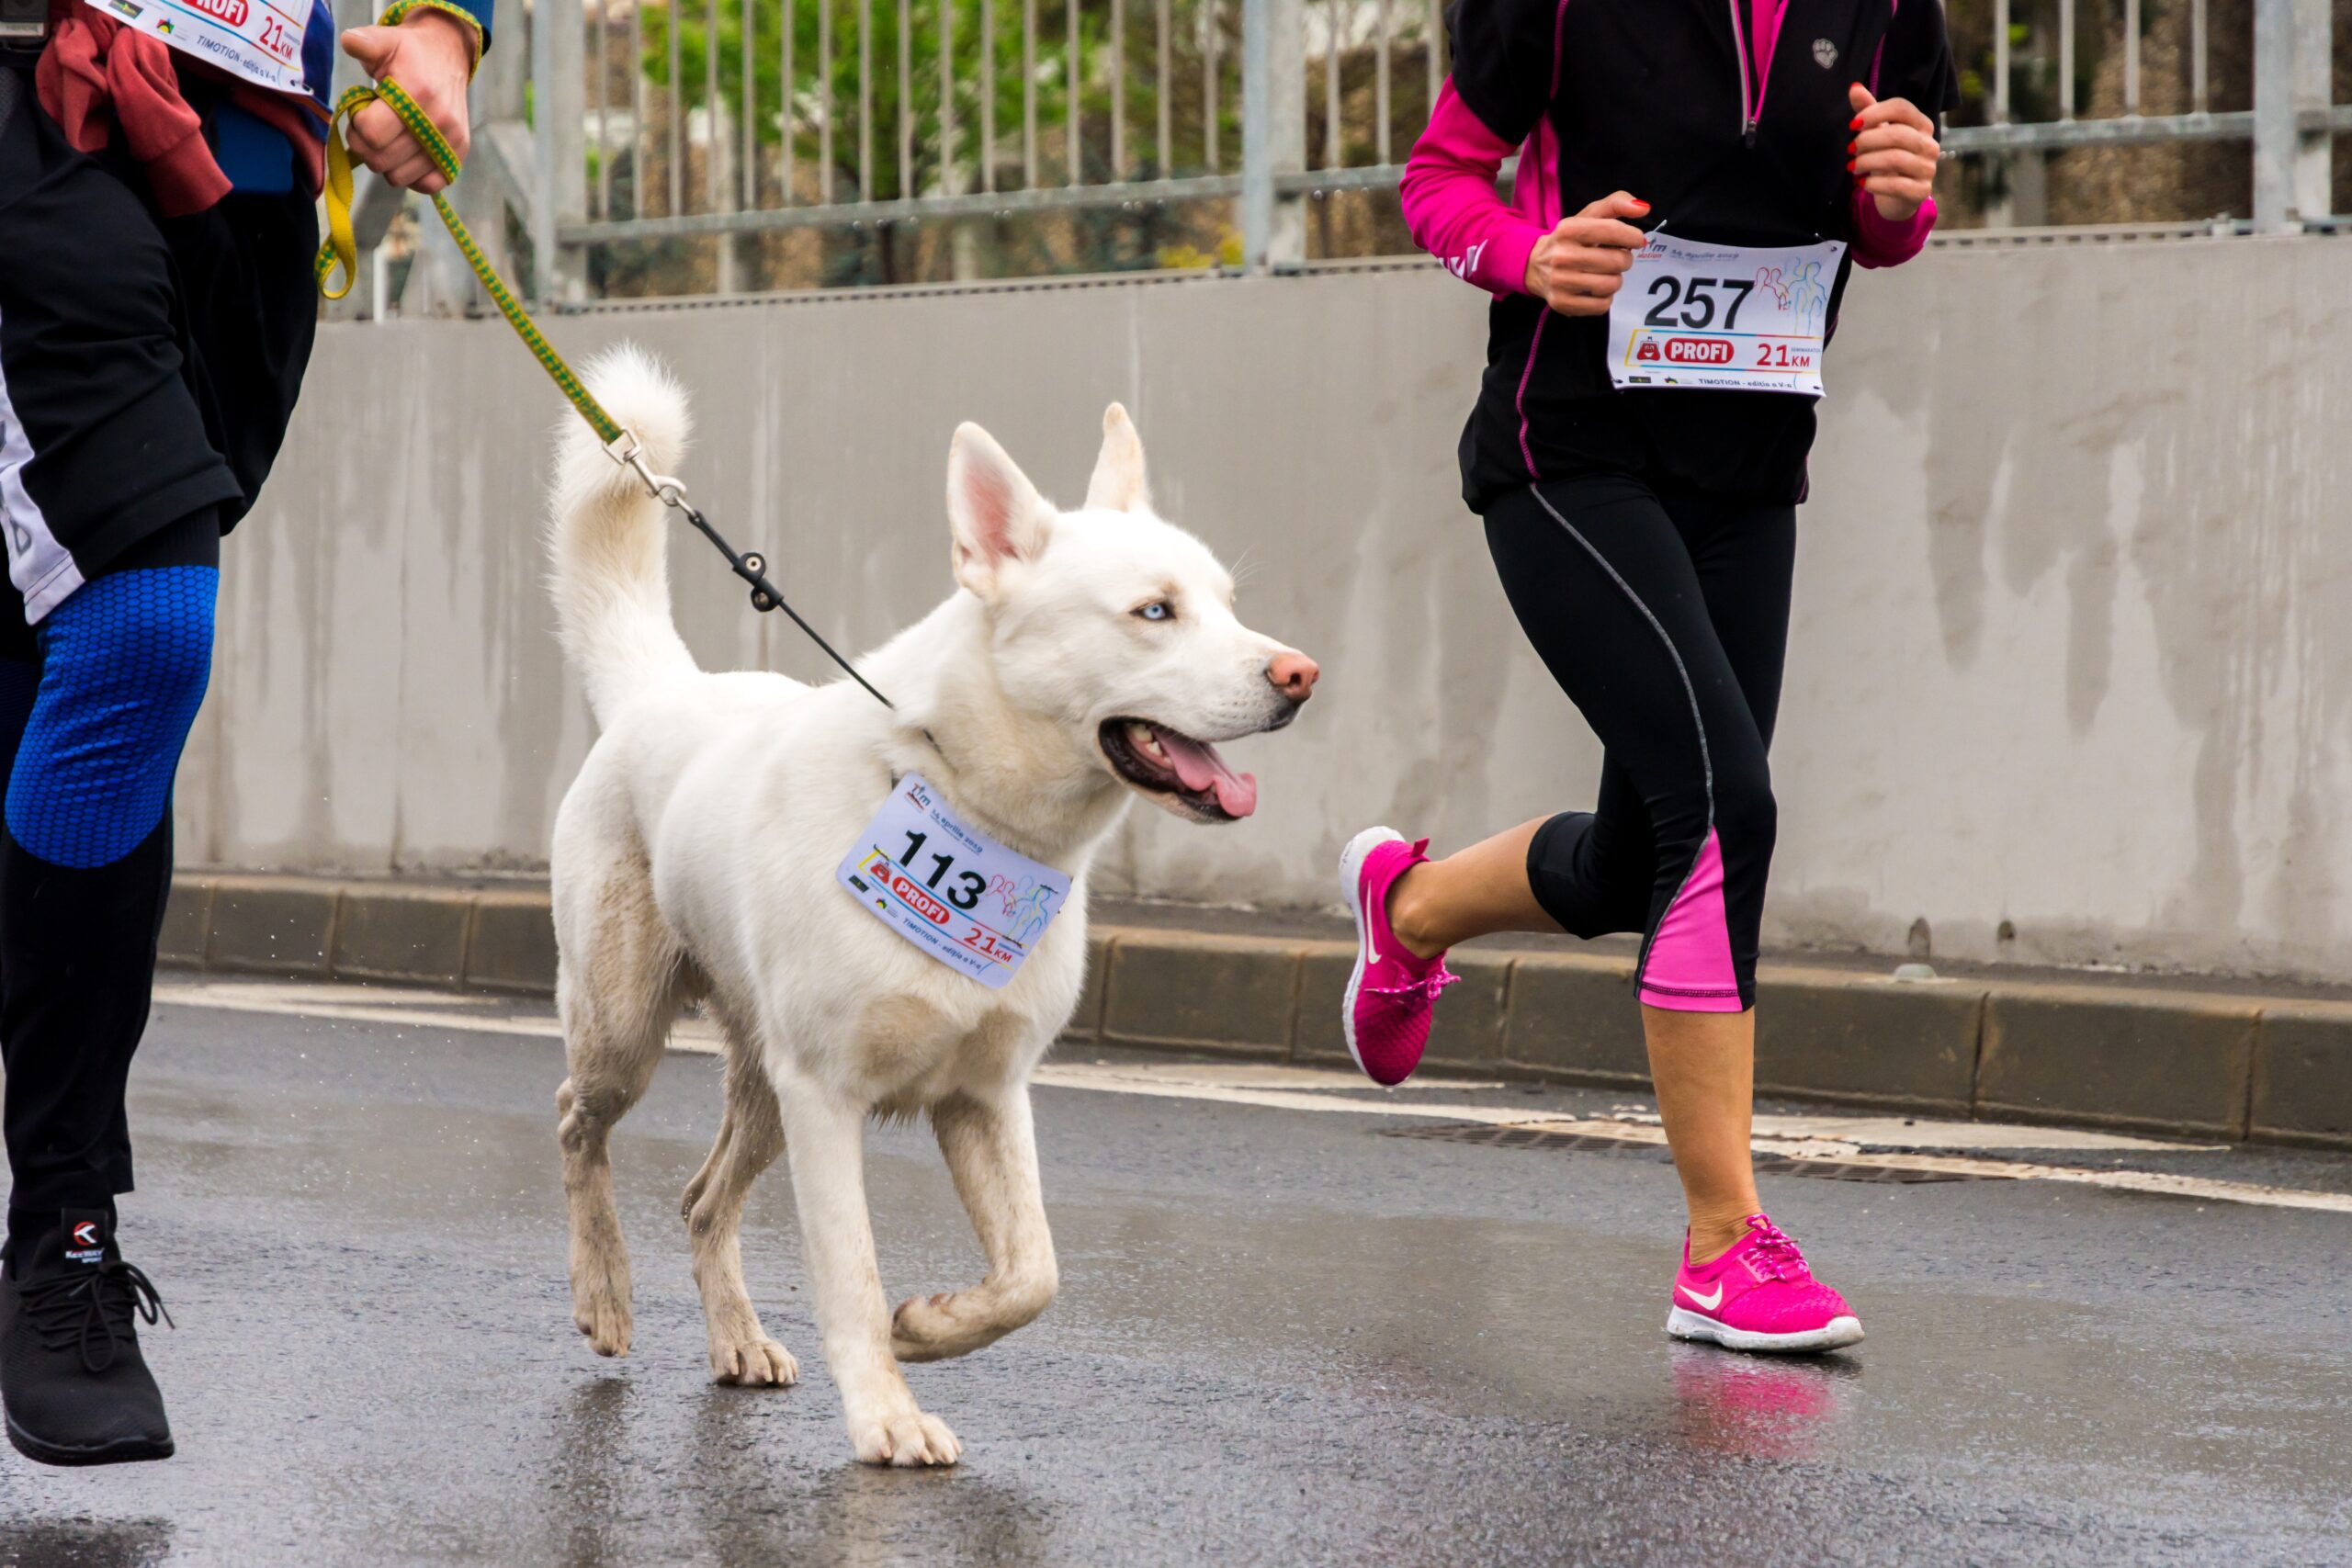 a dog and people running and walking in an a-thon fundraiser